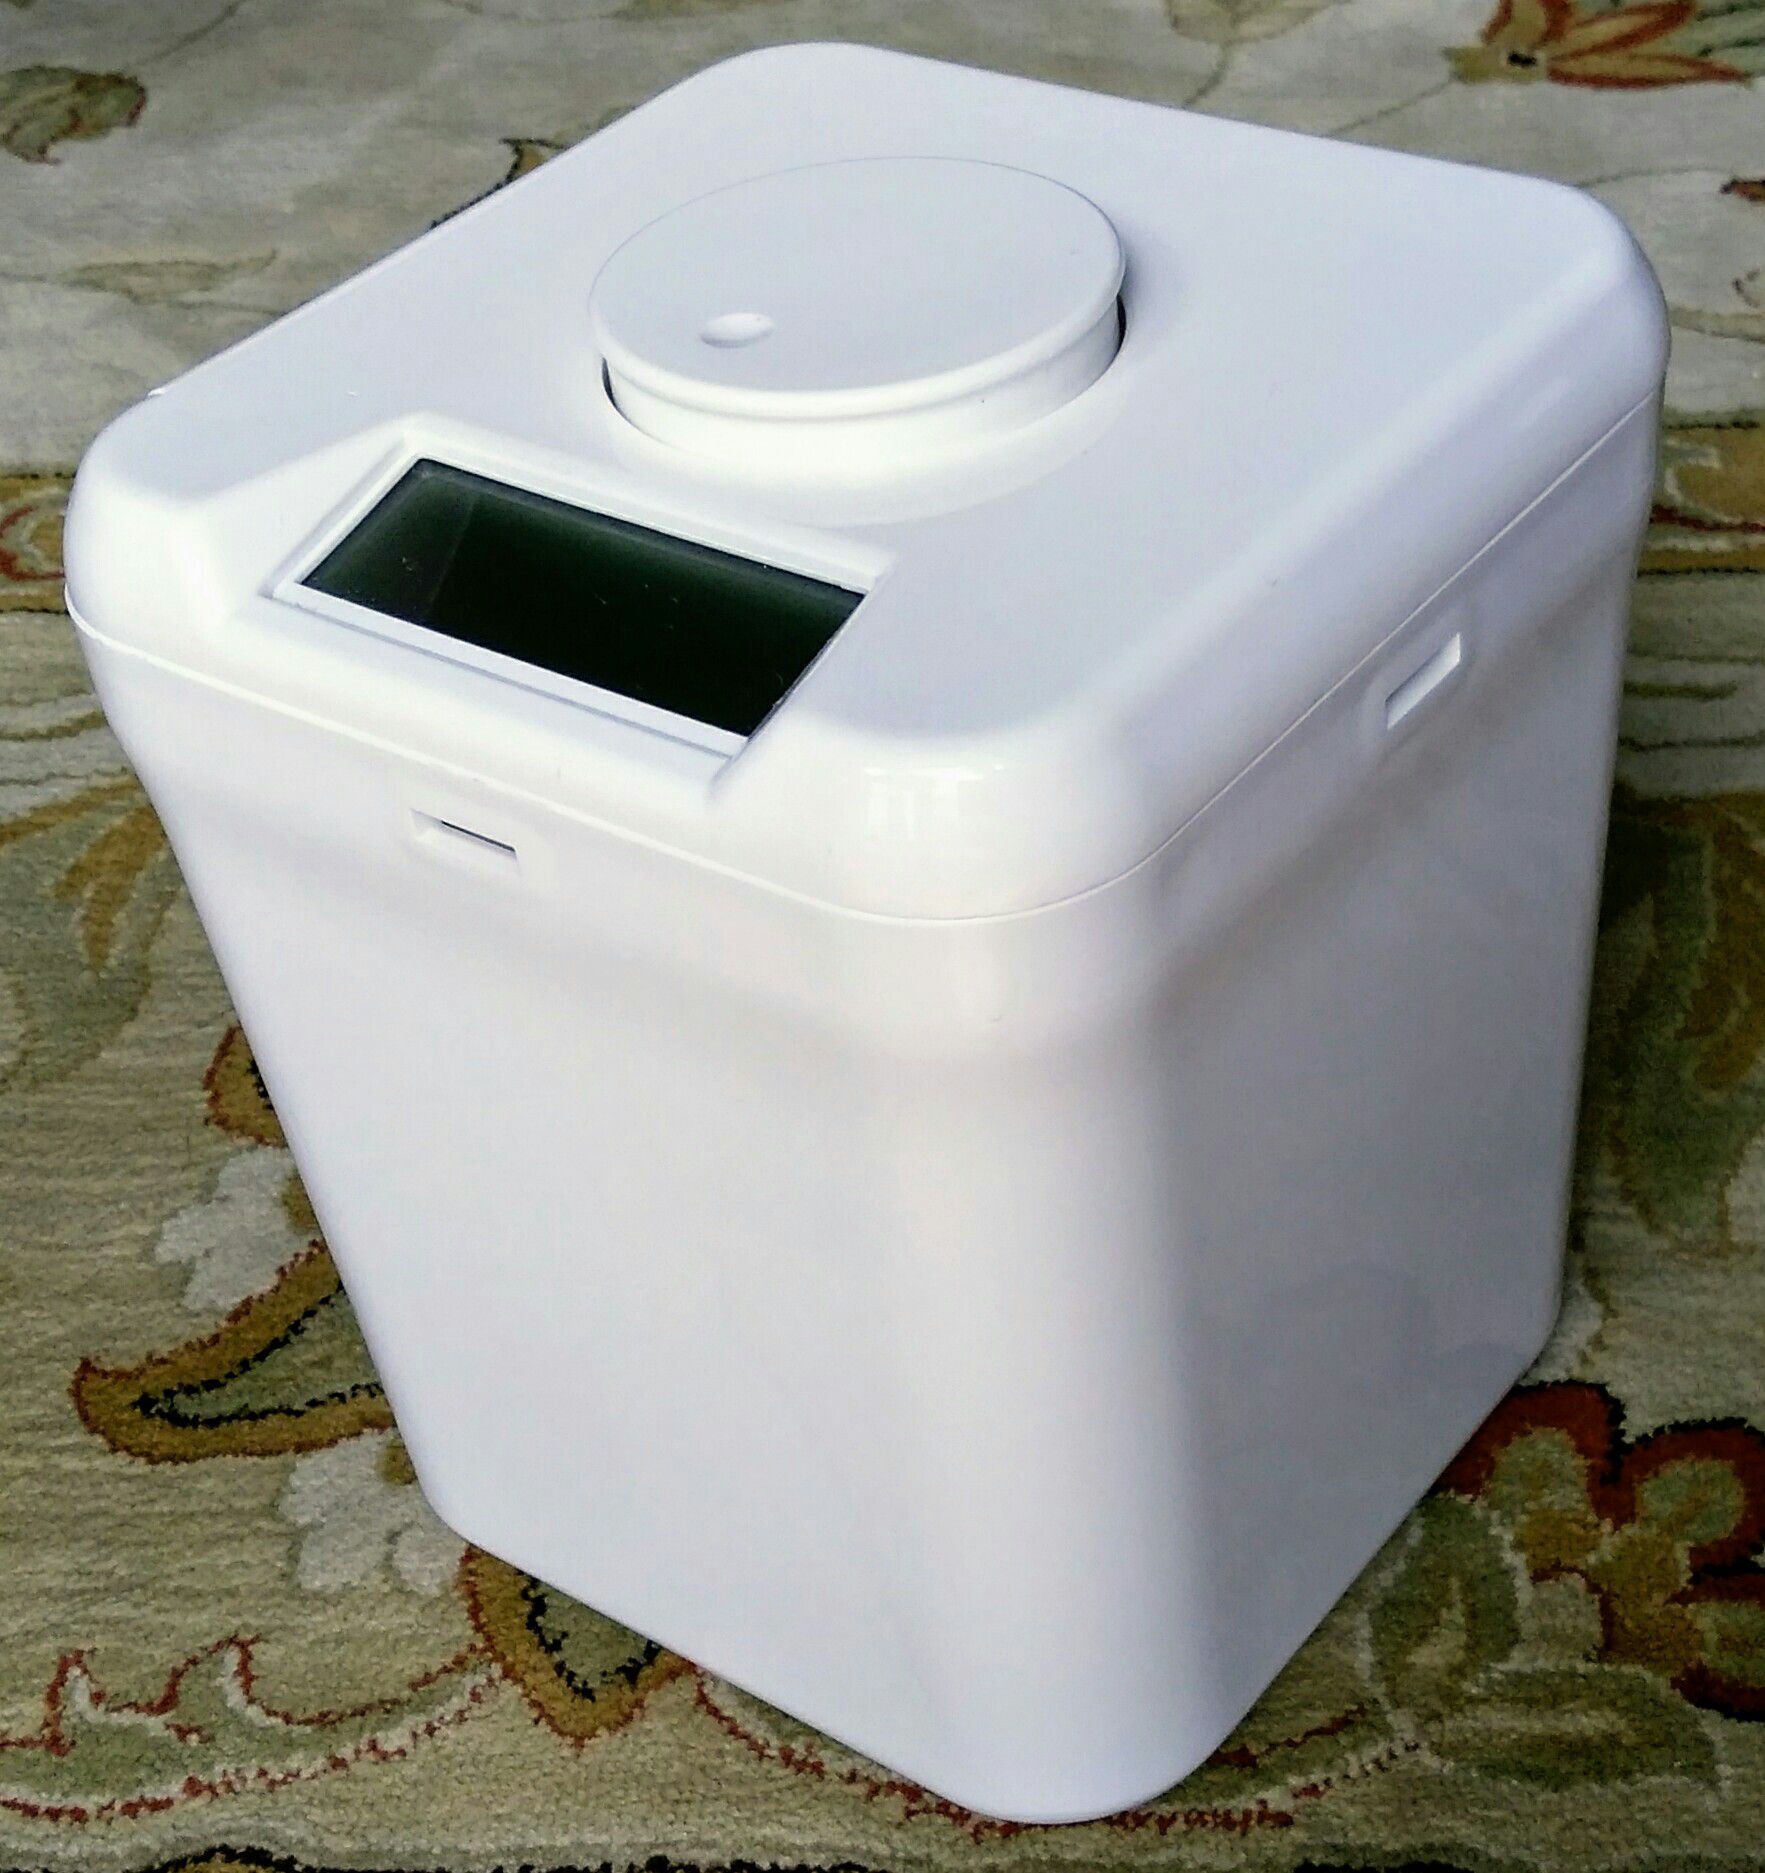 Kitchen Safe time locking food container white lid/base